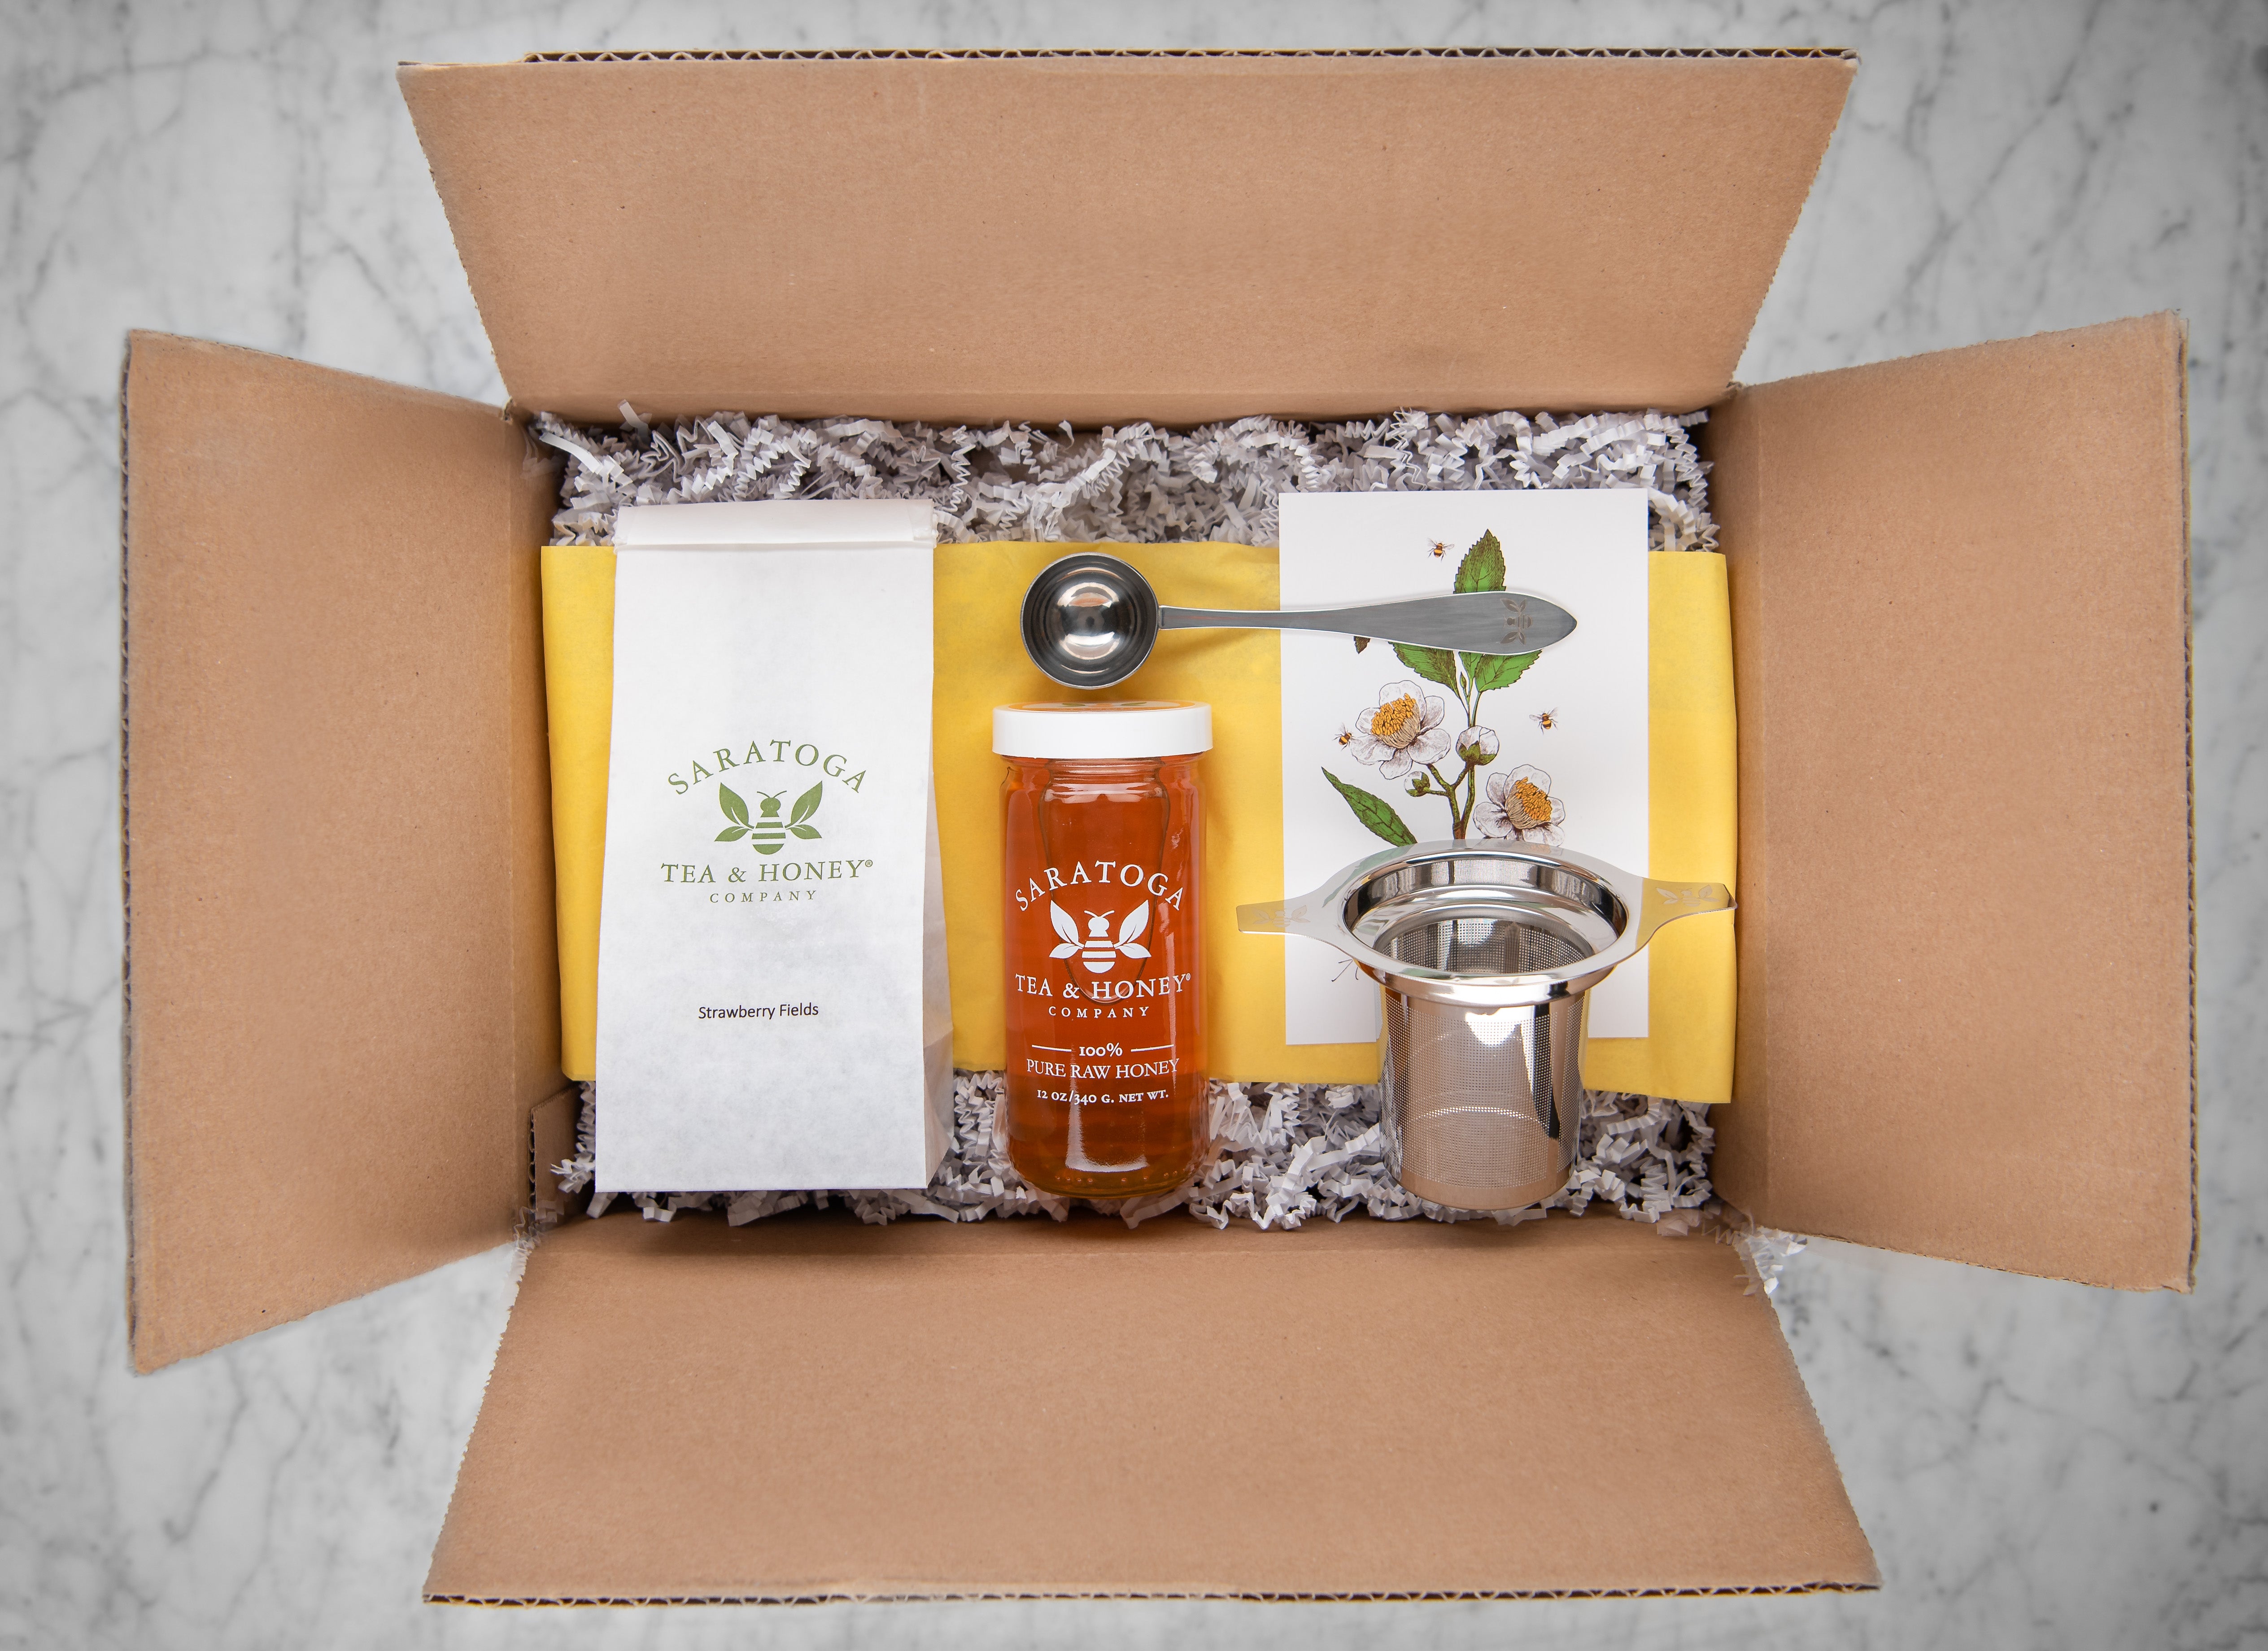 summer tea and honey box: cardboard box with decorative fill, strawberry fields tea, mango infused honey, tea infuser, and tea scoop